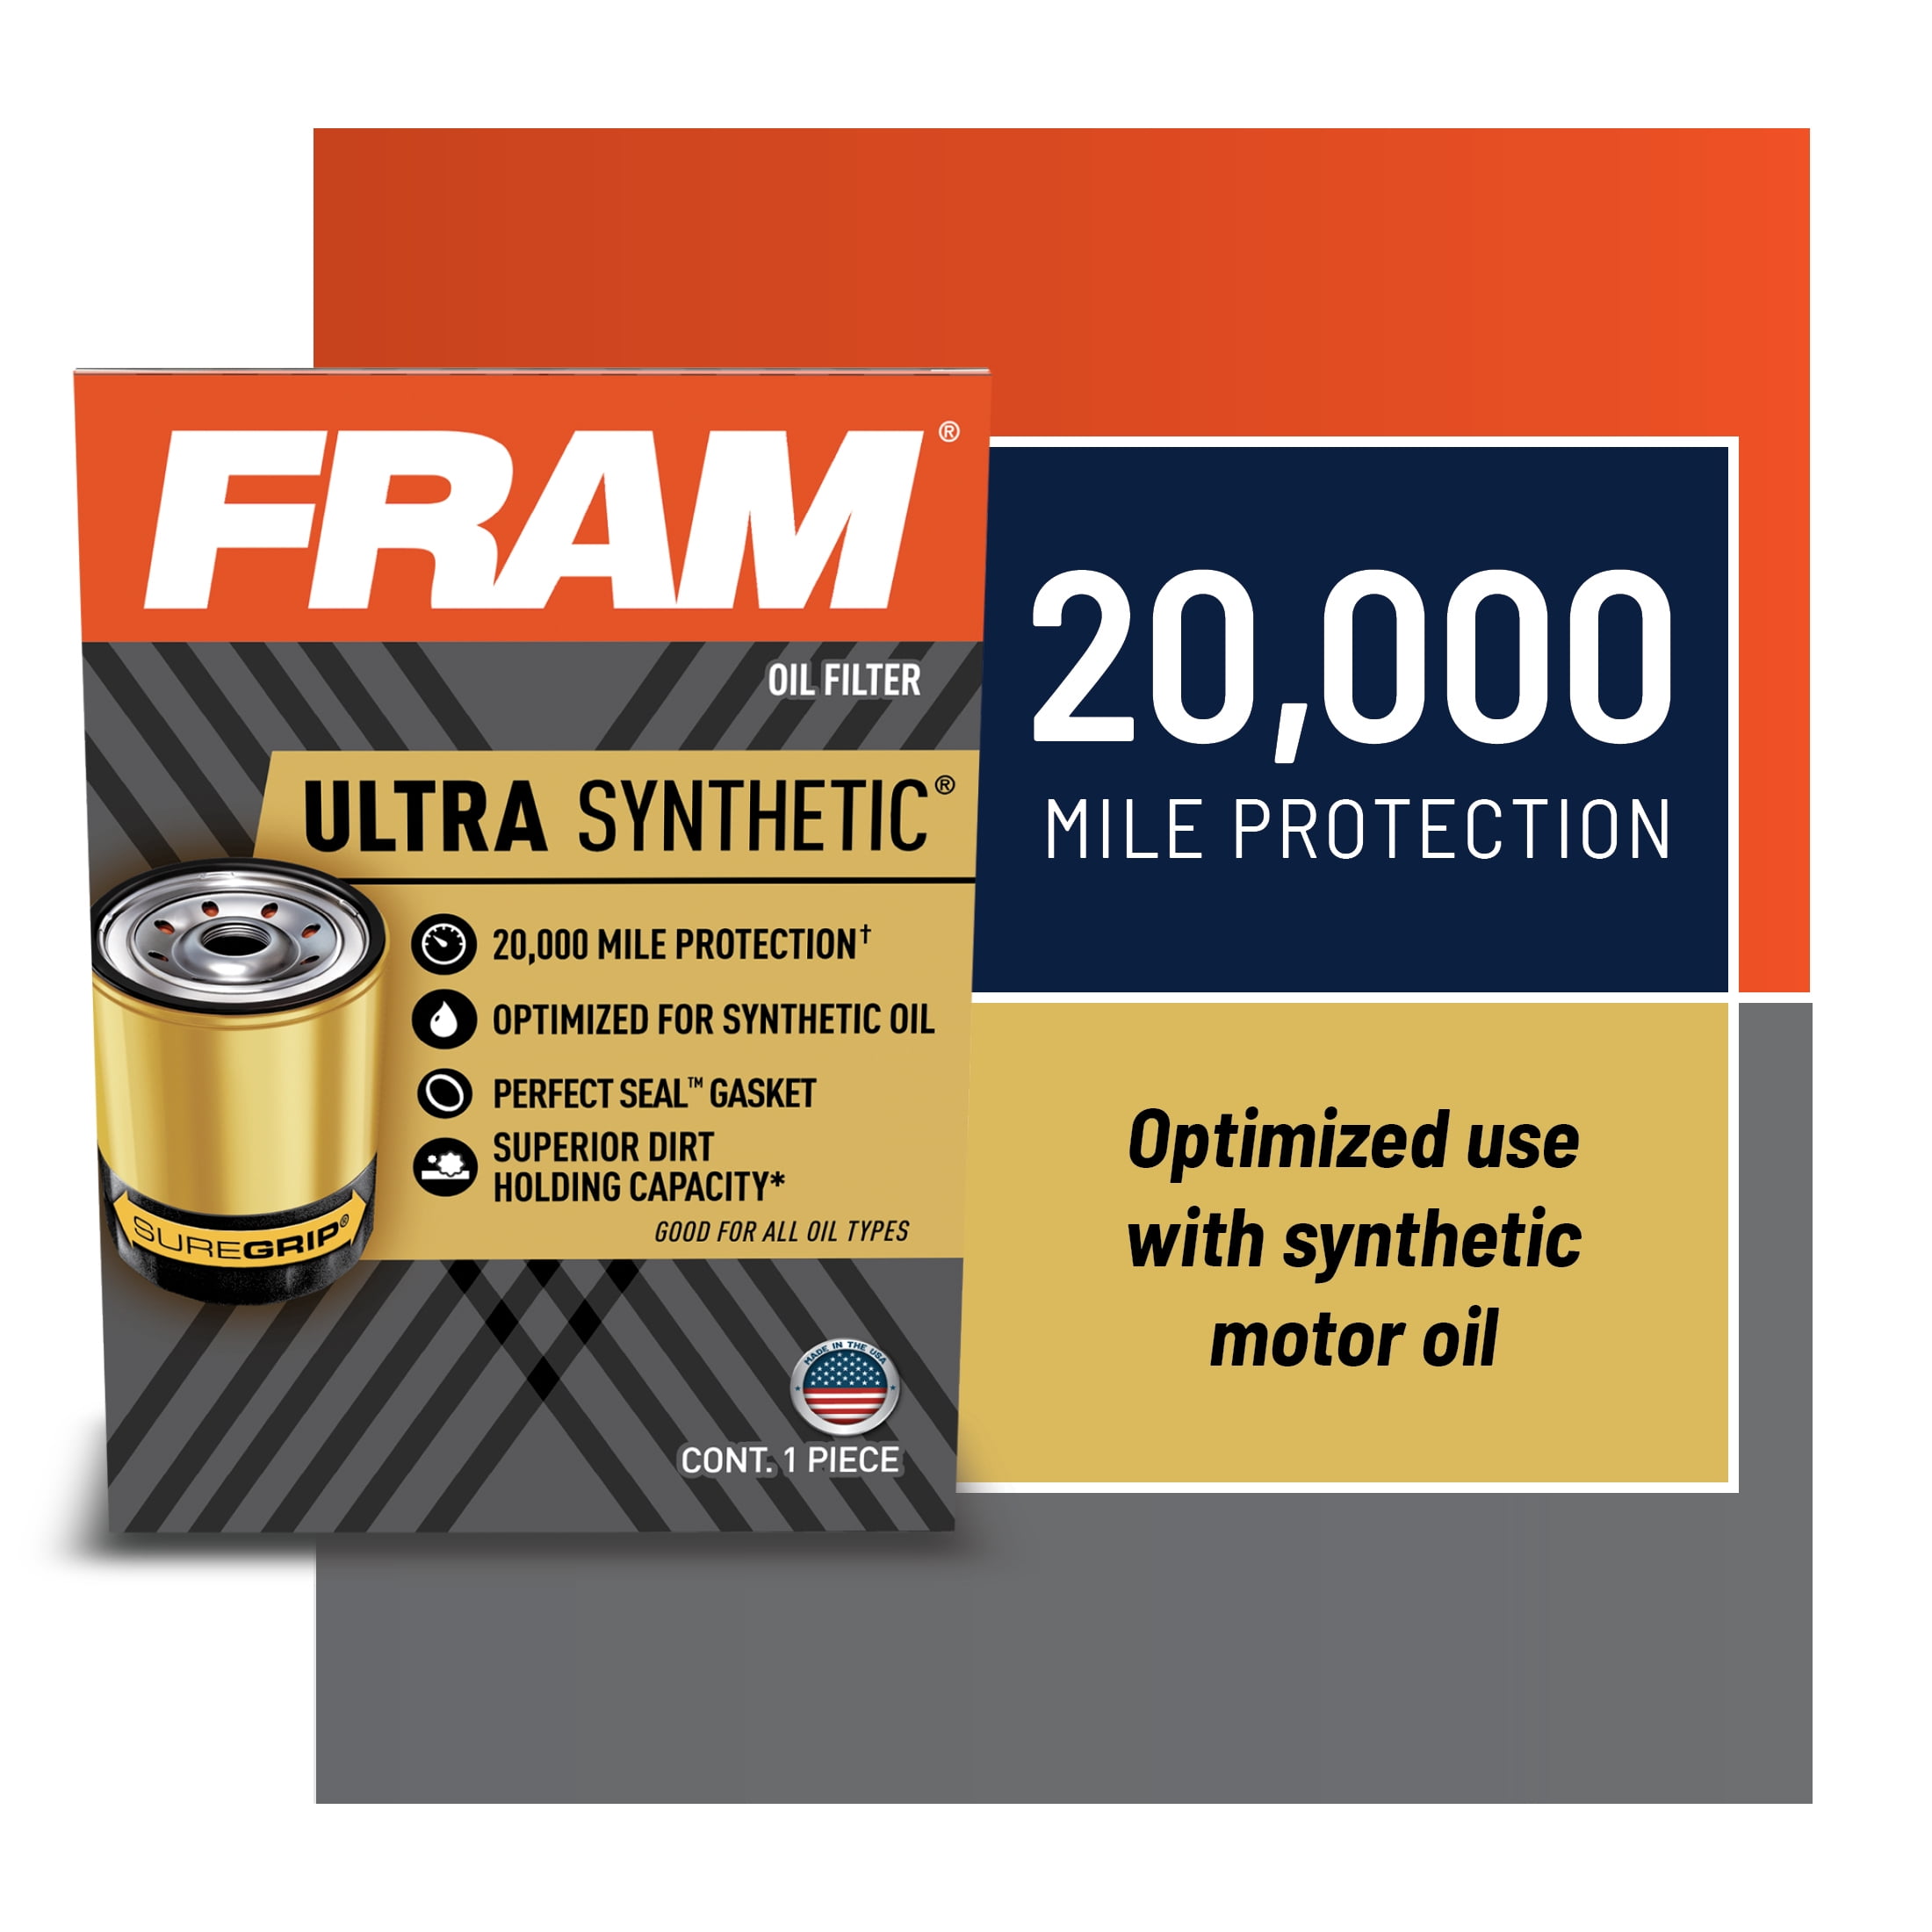 FRAM Ultra Synthetic Oil Filter, XG7317, 20K mile Replacement Engine Oil Filter